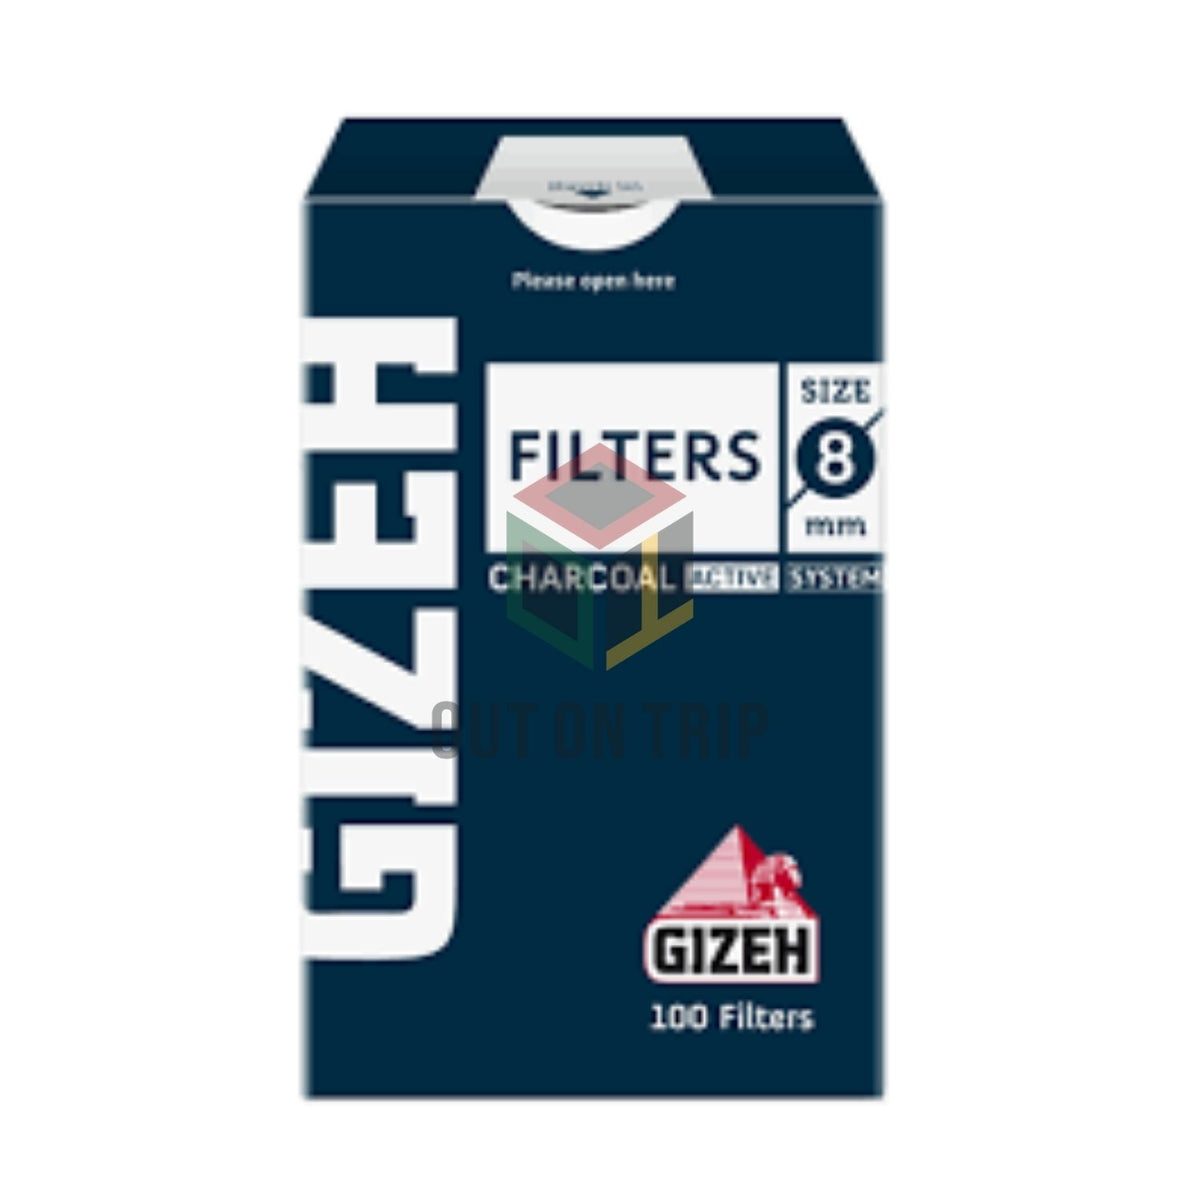 Gizeh King Size Filter Tips Roach Pad - 35 Tips - Revolucion Lifestyles